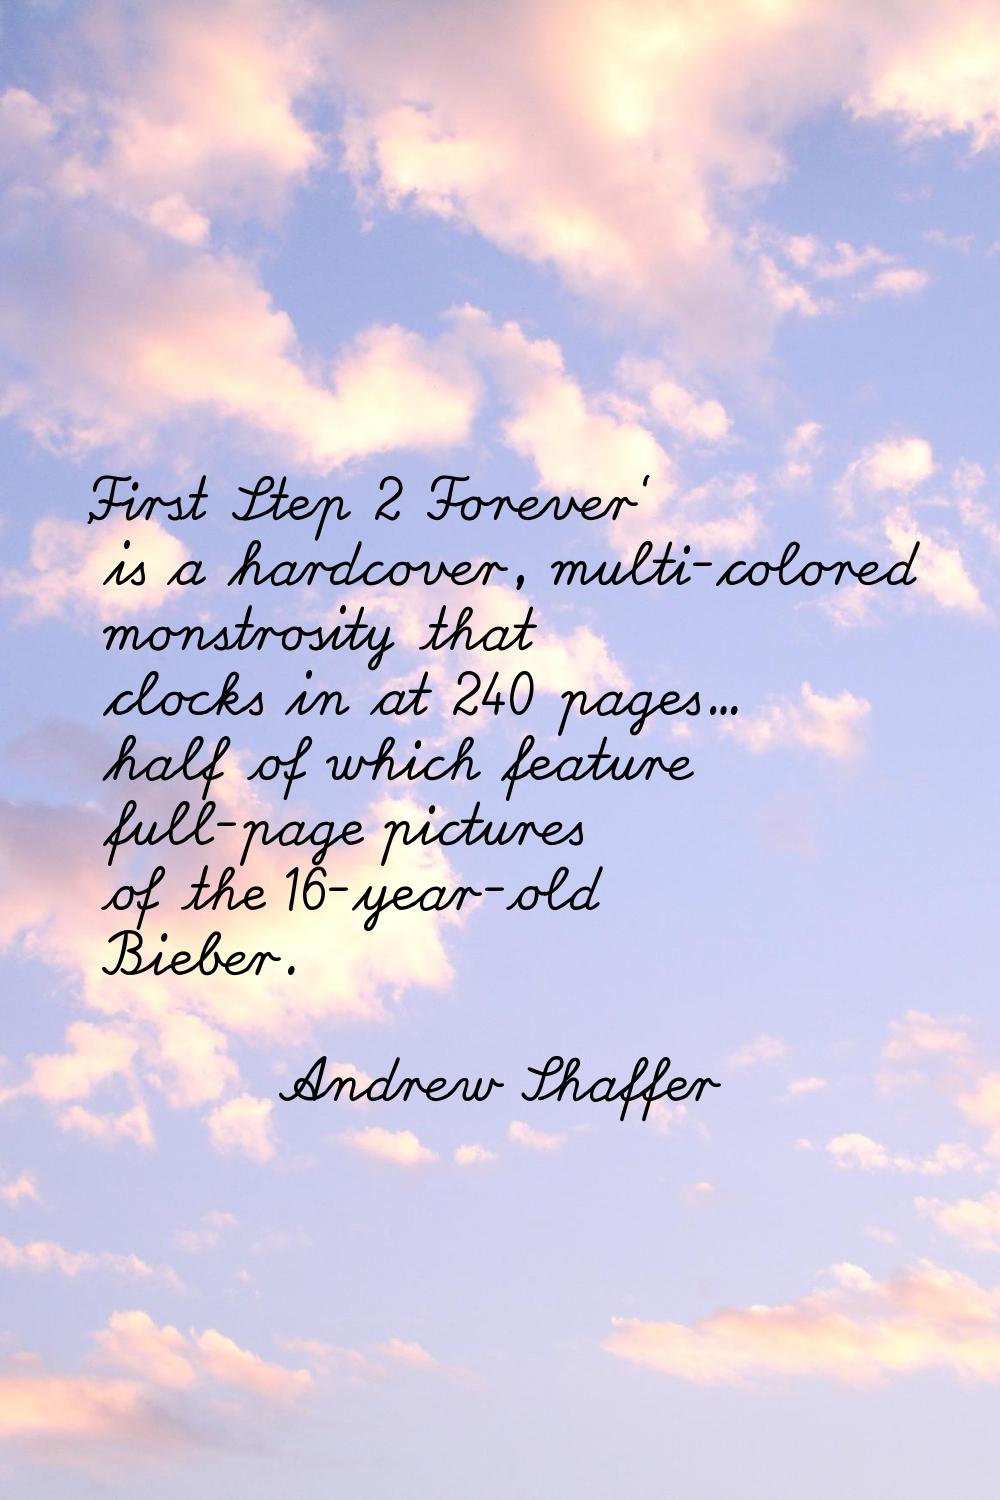 'First Step 2 Forever' is a hardcover, multi-colored monstrosity that clocks in at 240 pages... hal